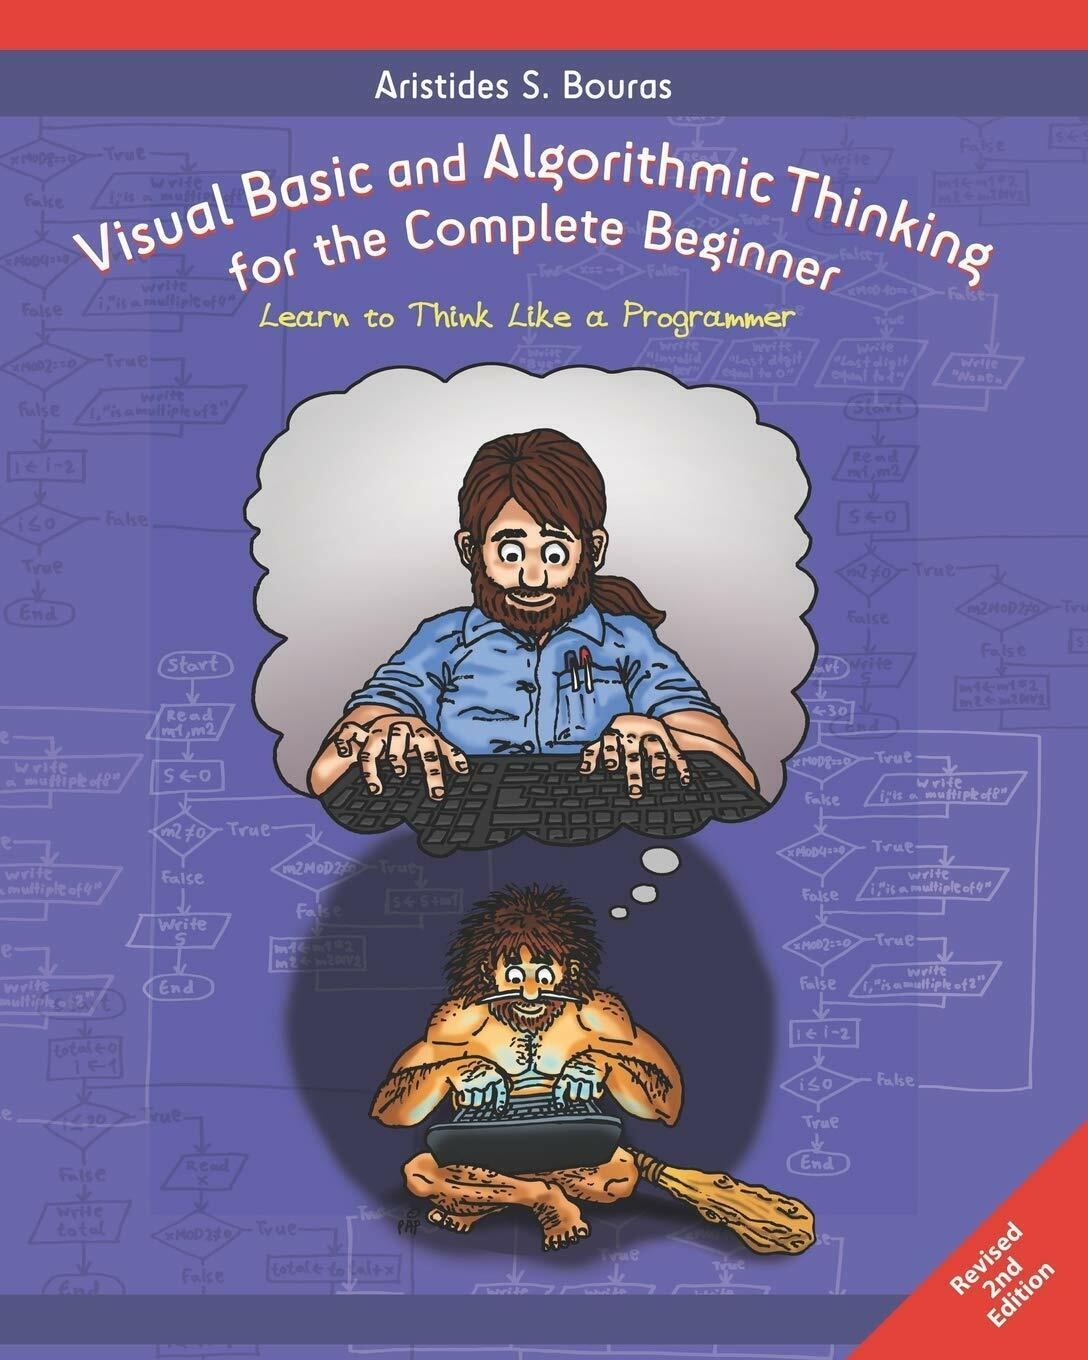 Visual Basic and Algorithmic Thinking for the Complete Beginner (2nd Edition) Le